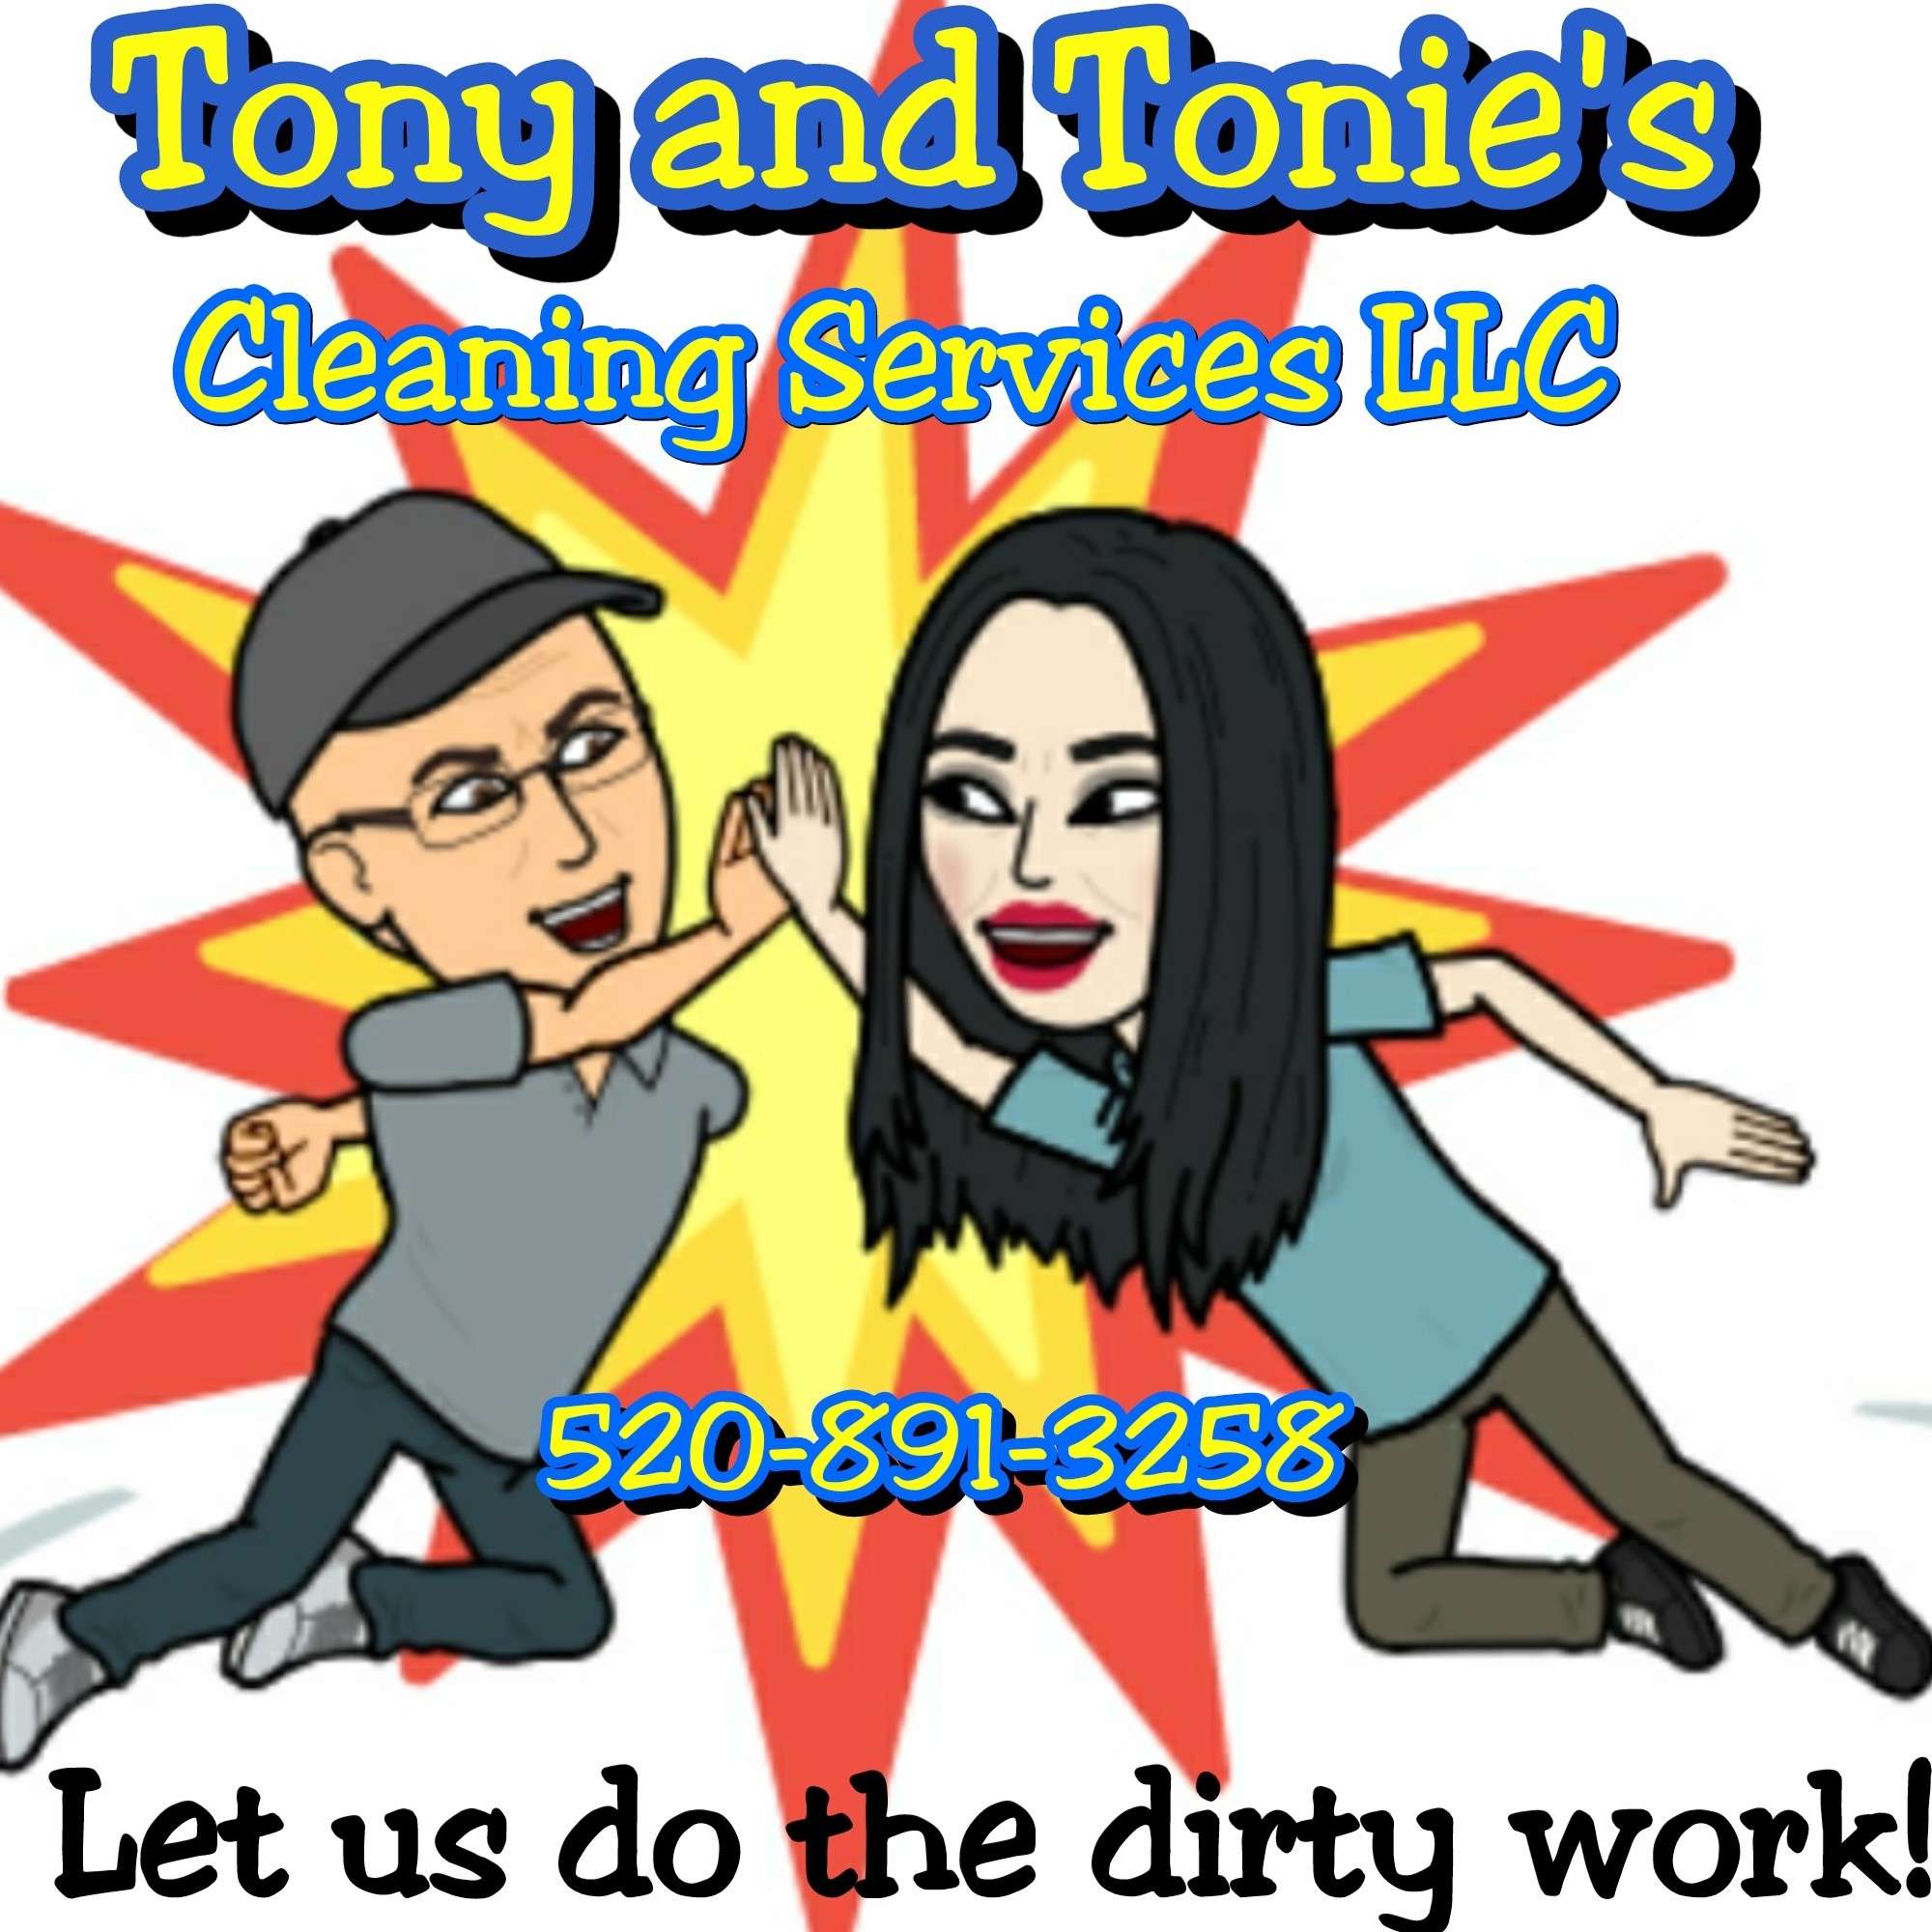 Tony and Tonie's Cleaning Services LLC Logo